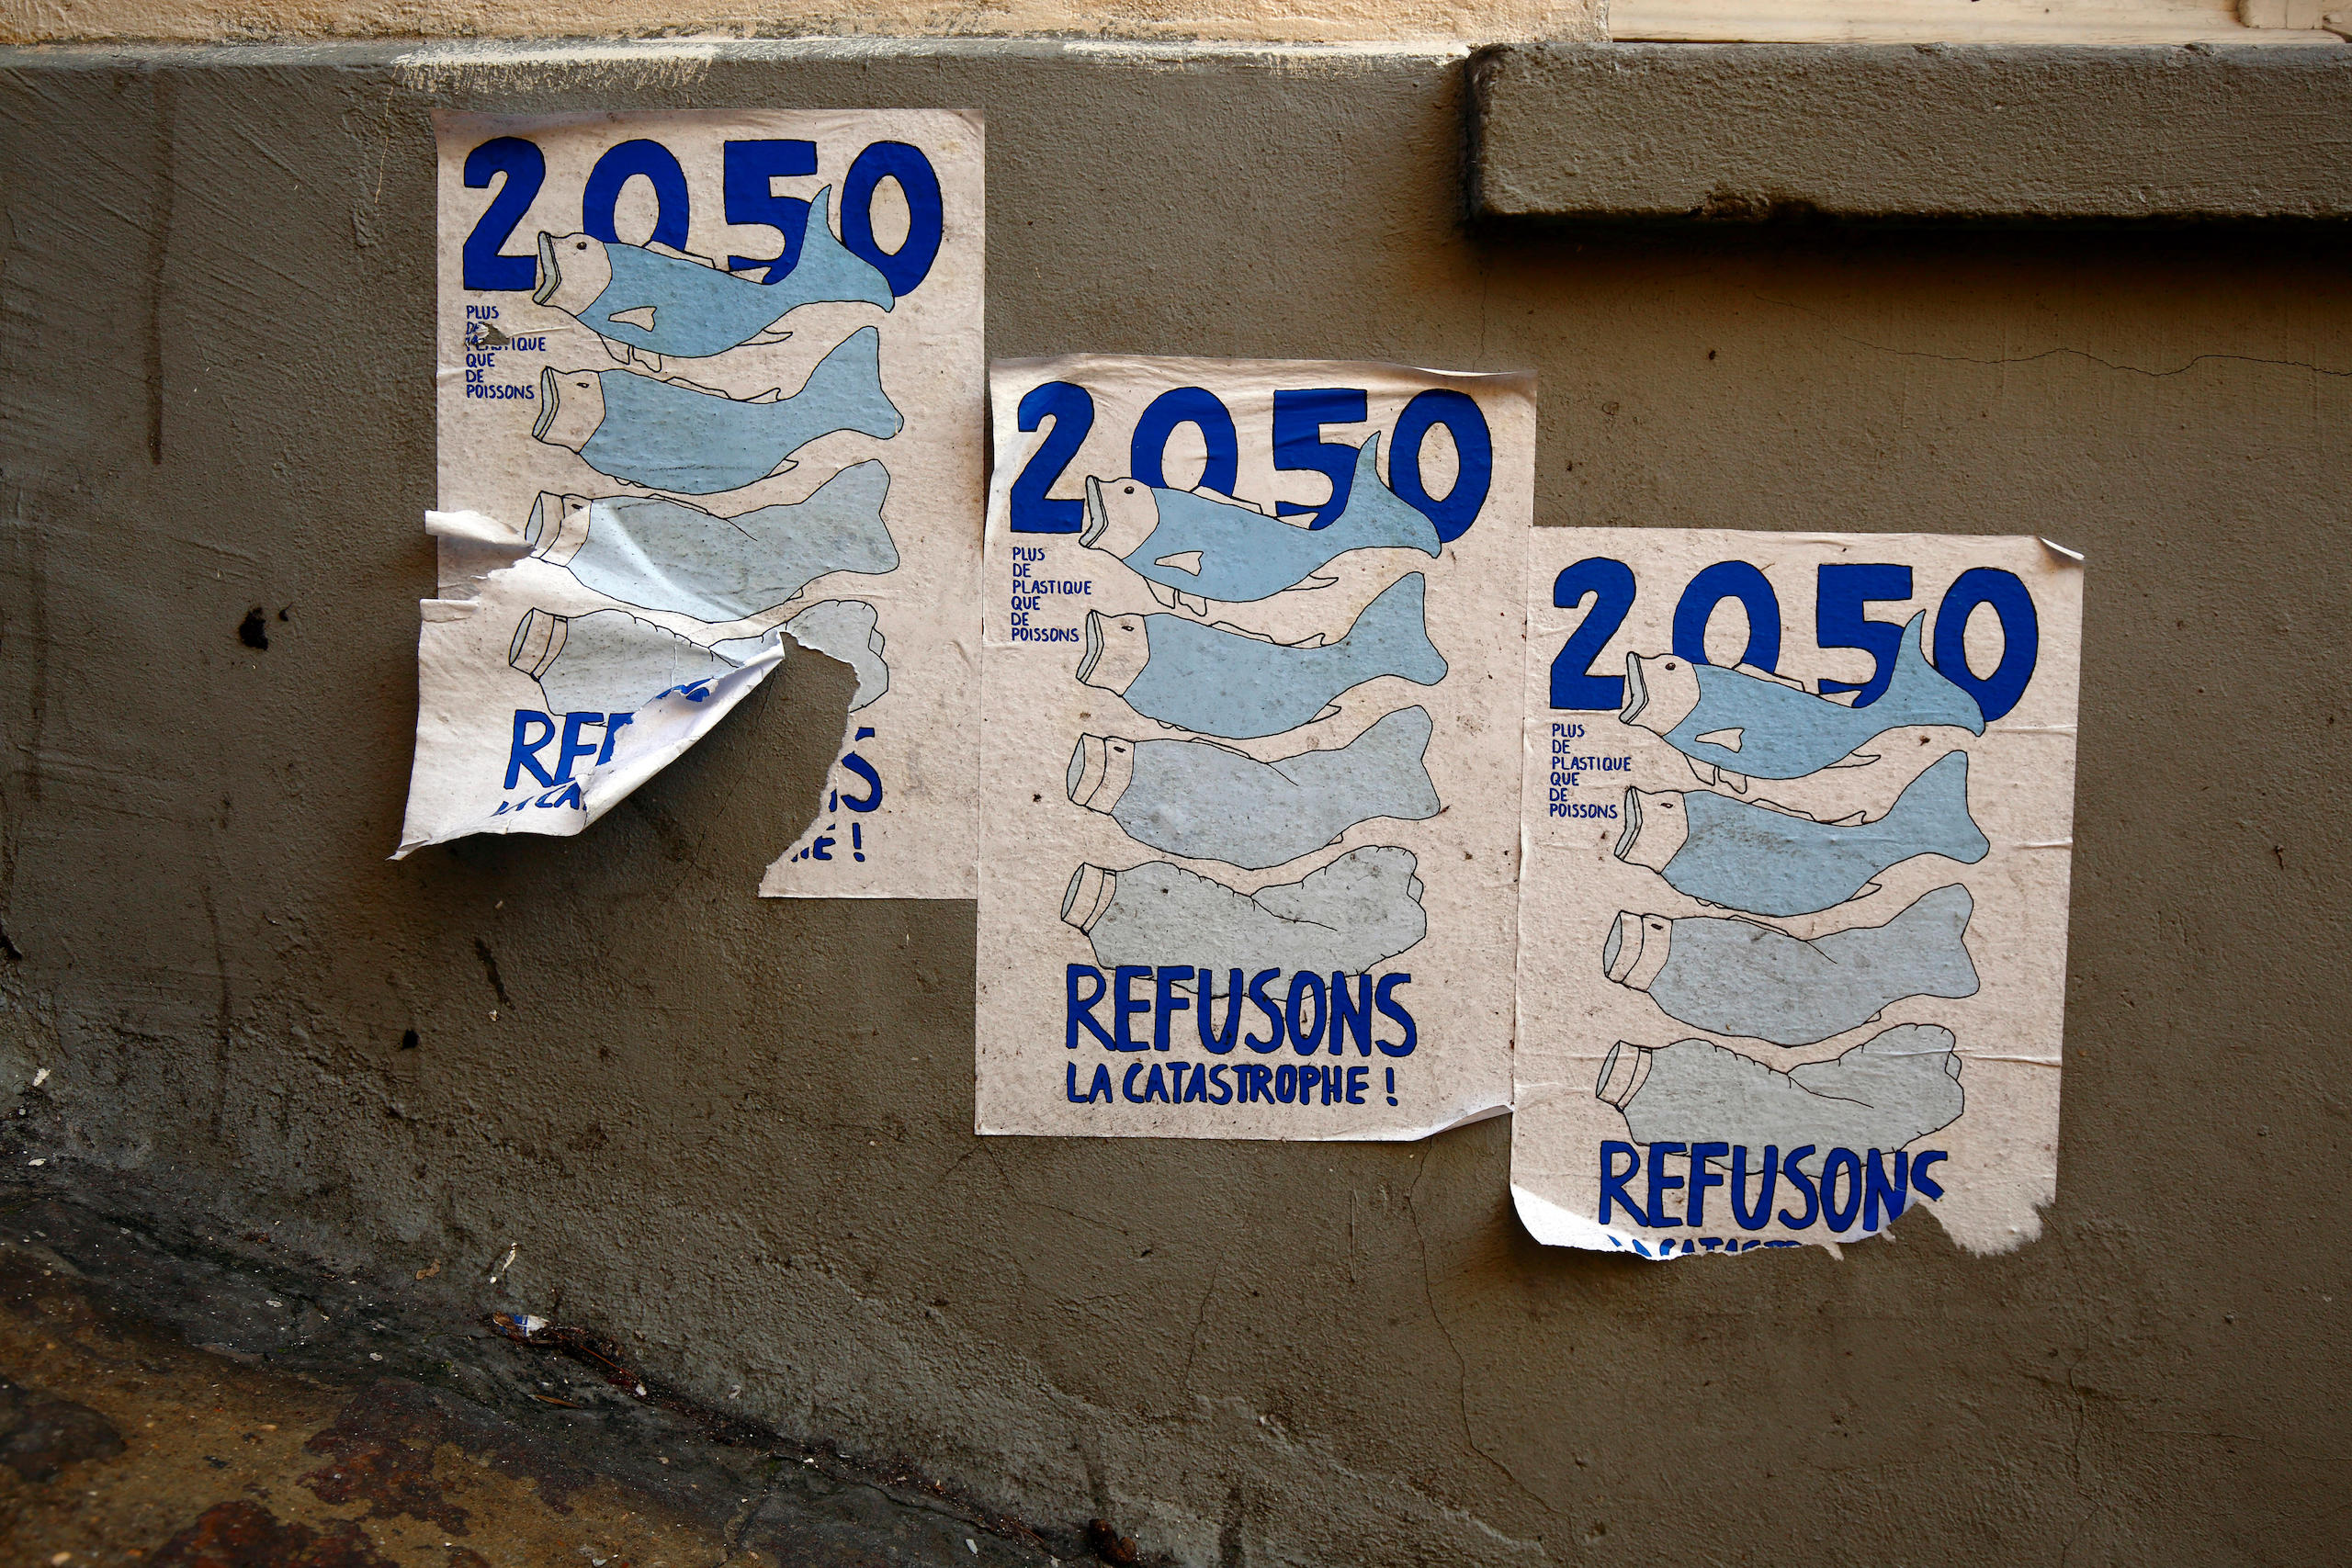 <p>A poster on a wall in Paris, France reads: “2050: More plastic than fish. Refuse catastrophe!” (Image: Robert K. Chin / Alamy)</p>